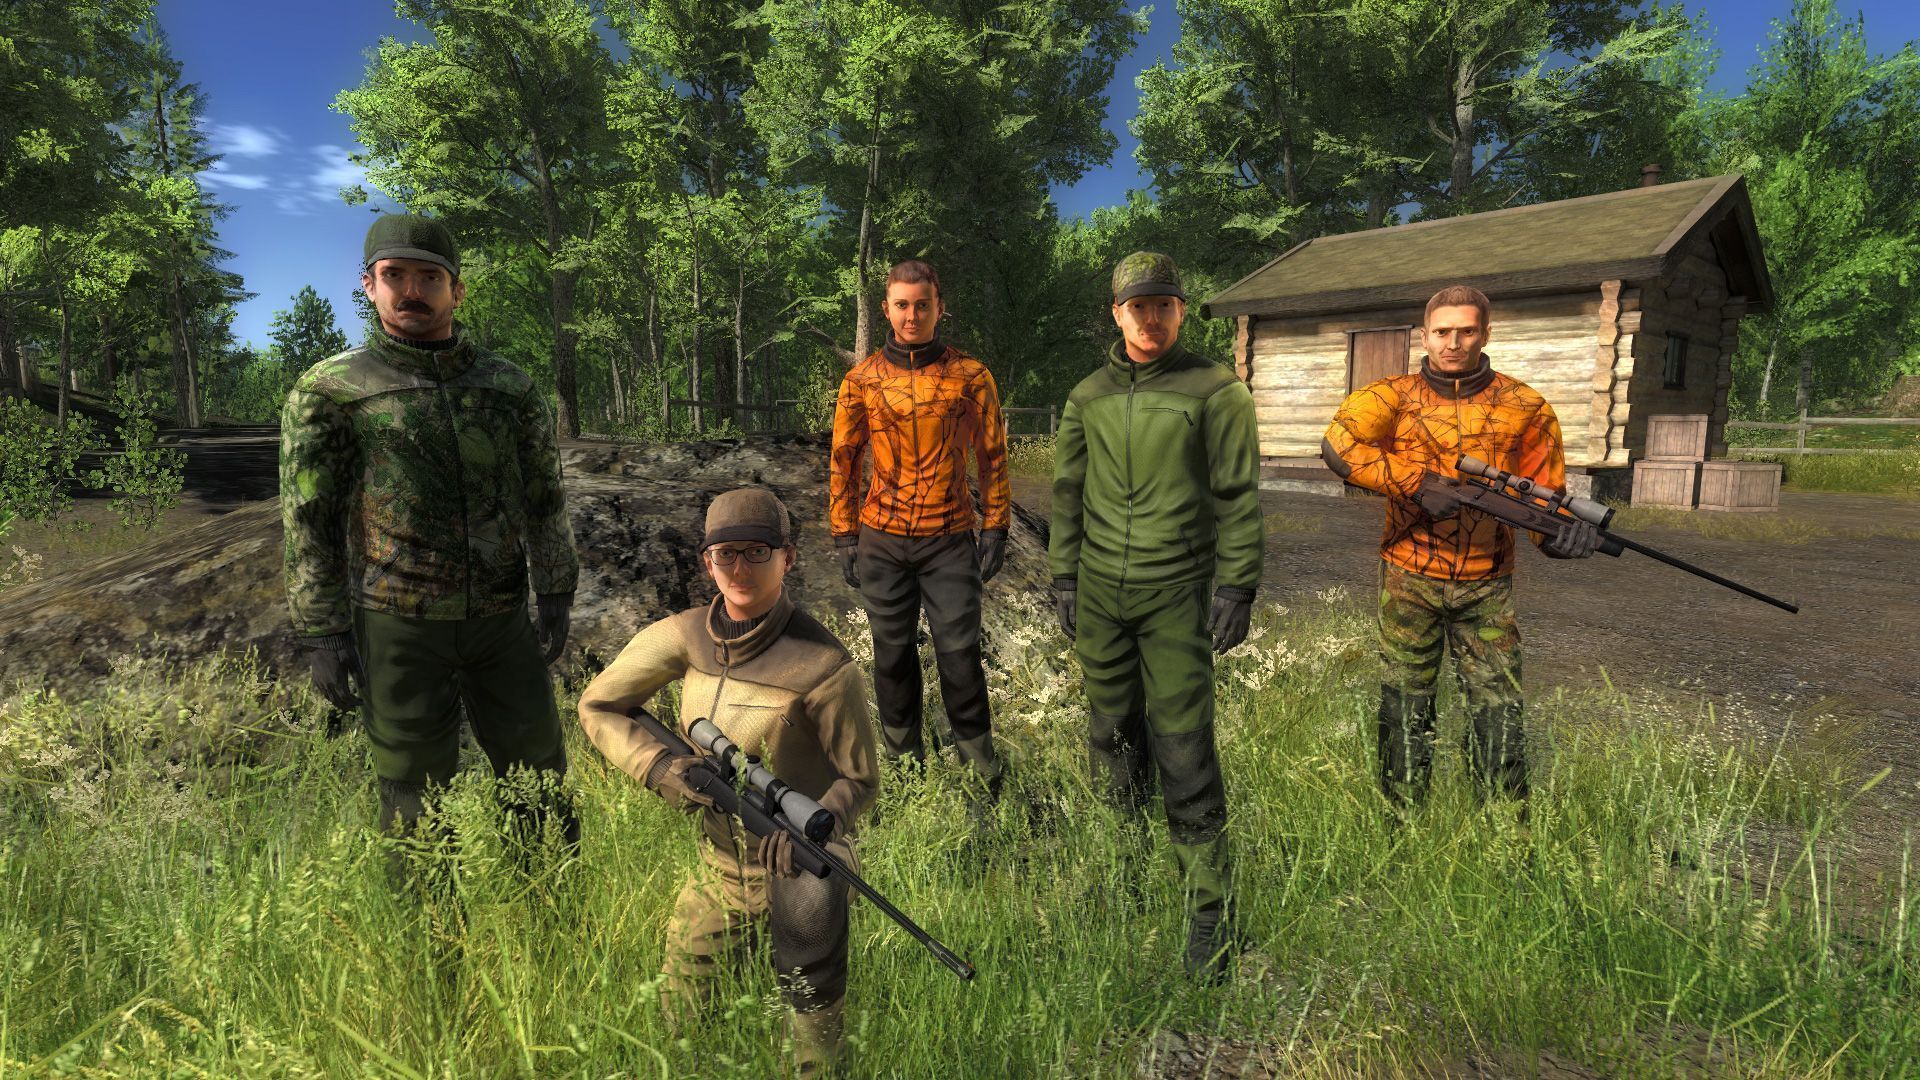 the hunter call of the wild multiplayer